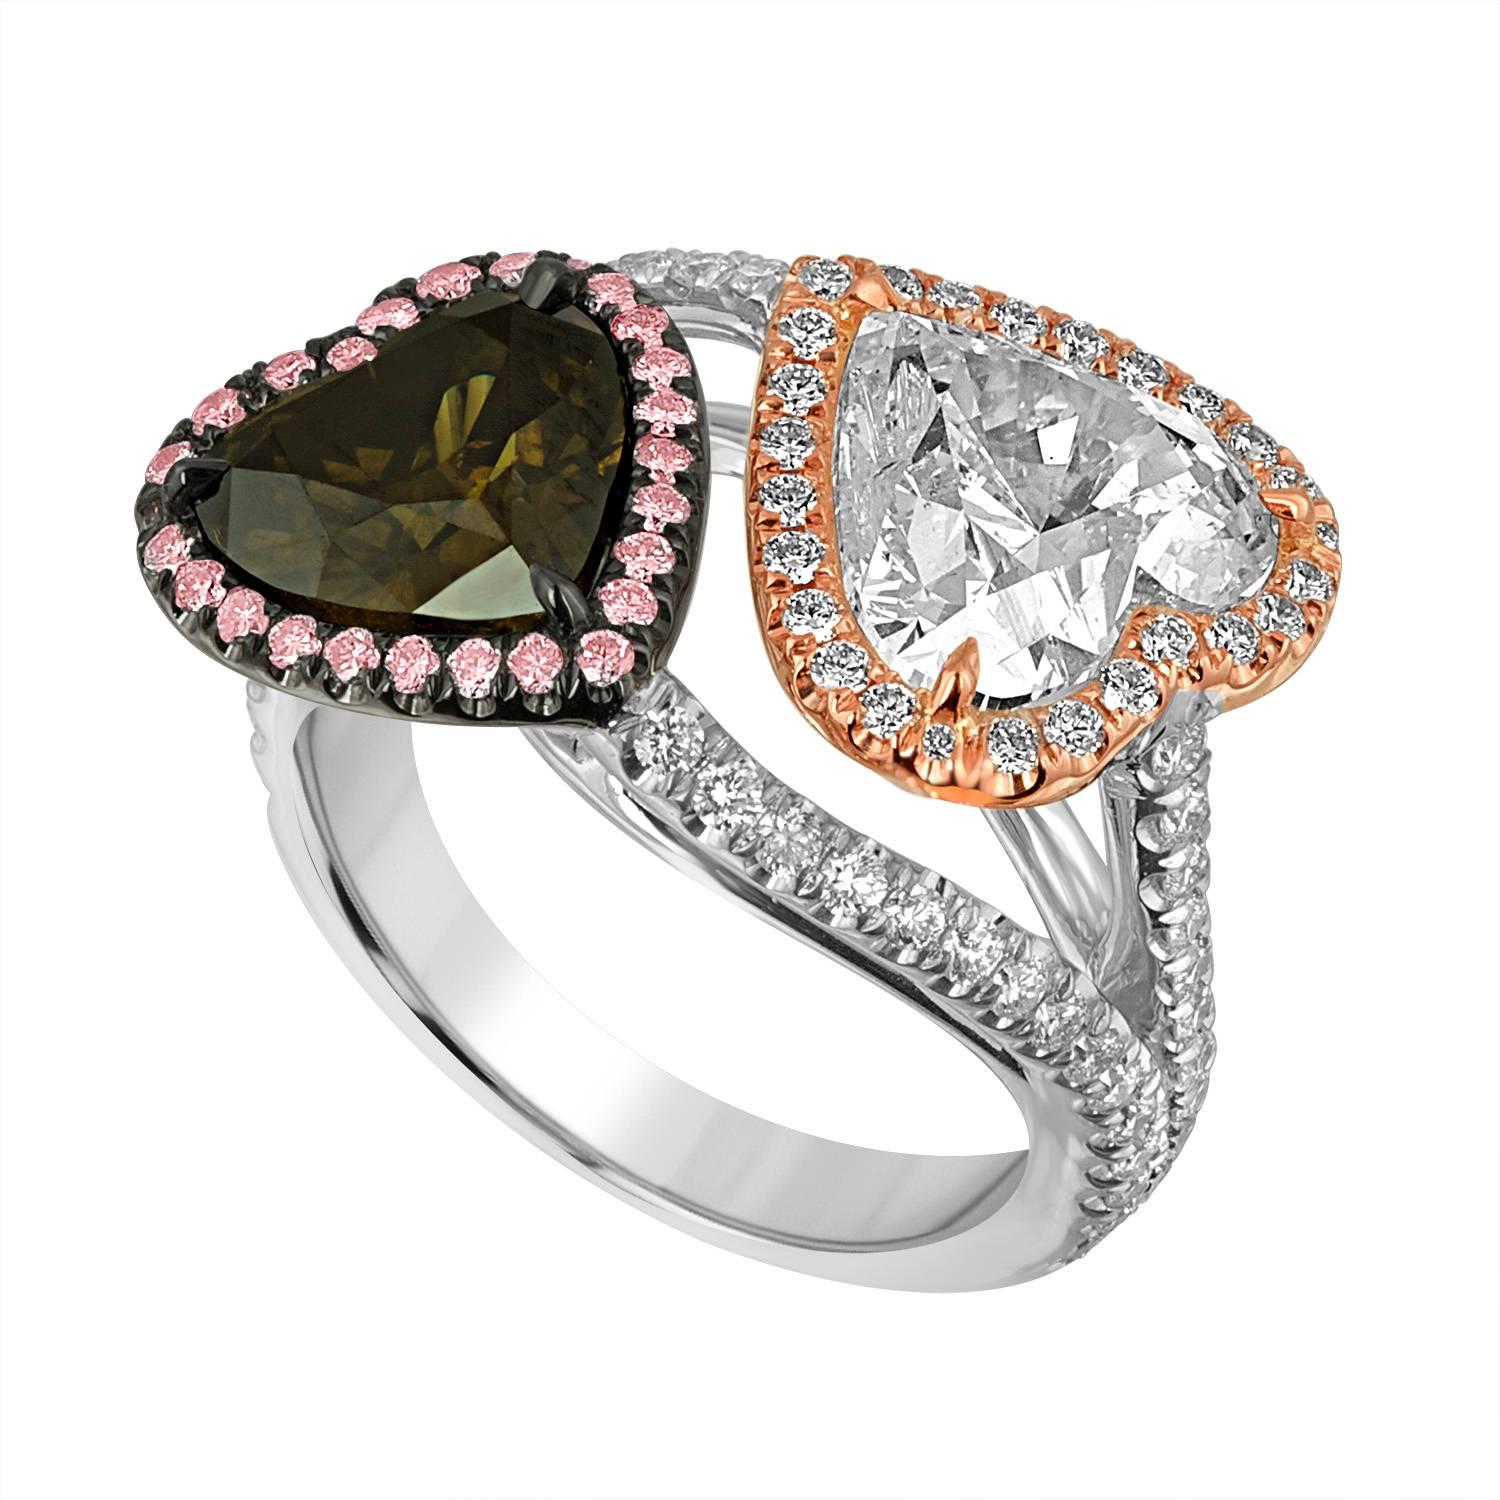 Two Hearts hugging each other. A  3.03 Carat Heart Shape EGL Certified as H in Color and SI1 in Clarity Plus 2.08 Carat Heart Shape GIA Certified Fancy Dark Greenish Brown Diamond are complimenting each other in the way they are set.
The White